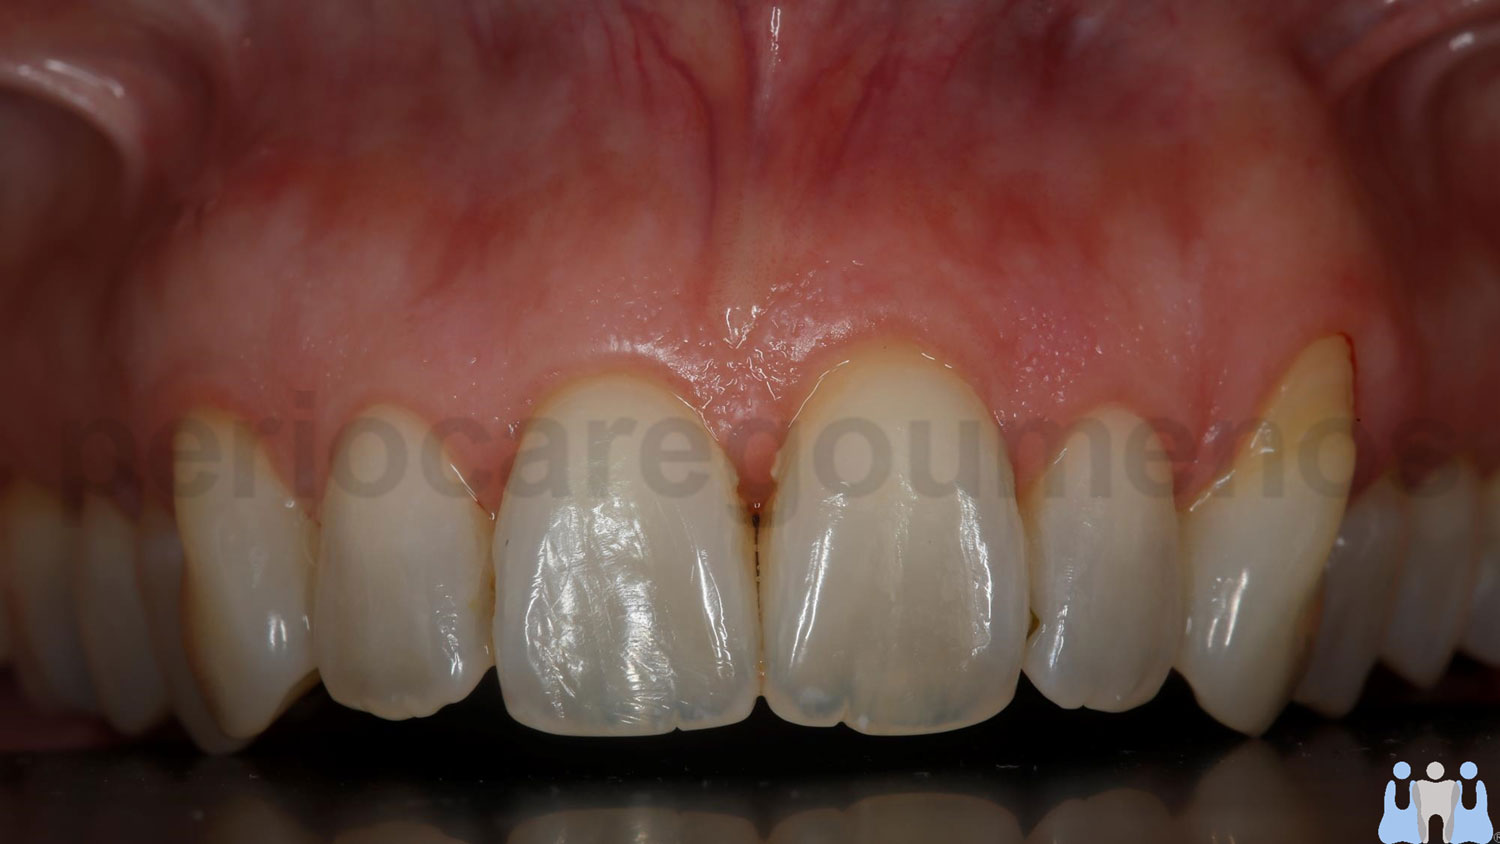 Root coverage with the combination of CTG and Coronally Advanced Flap